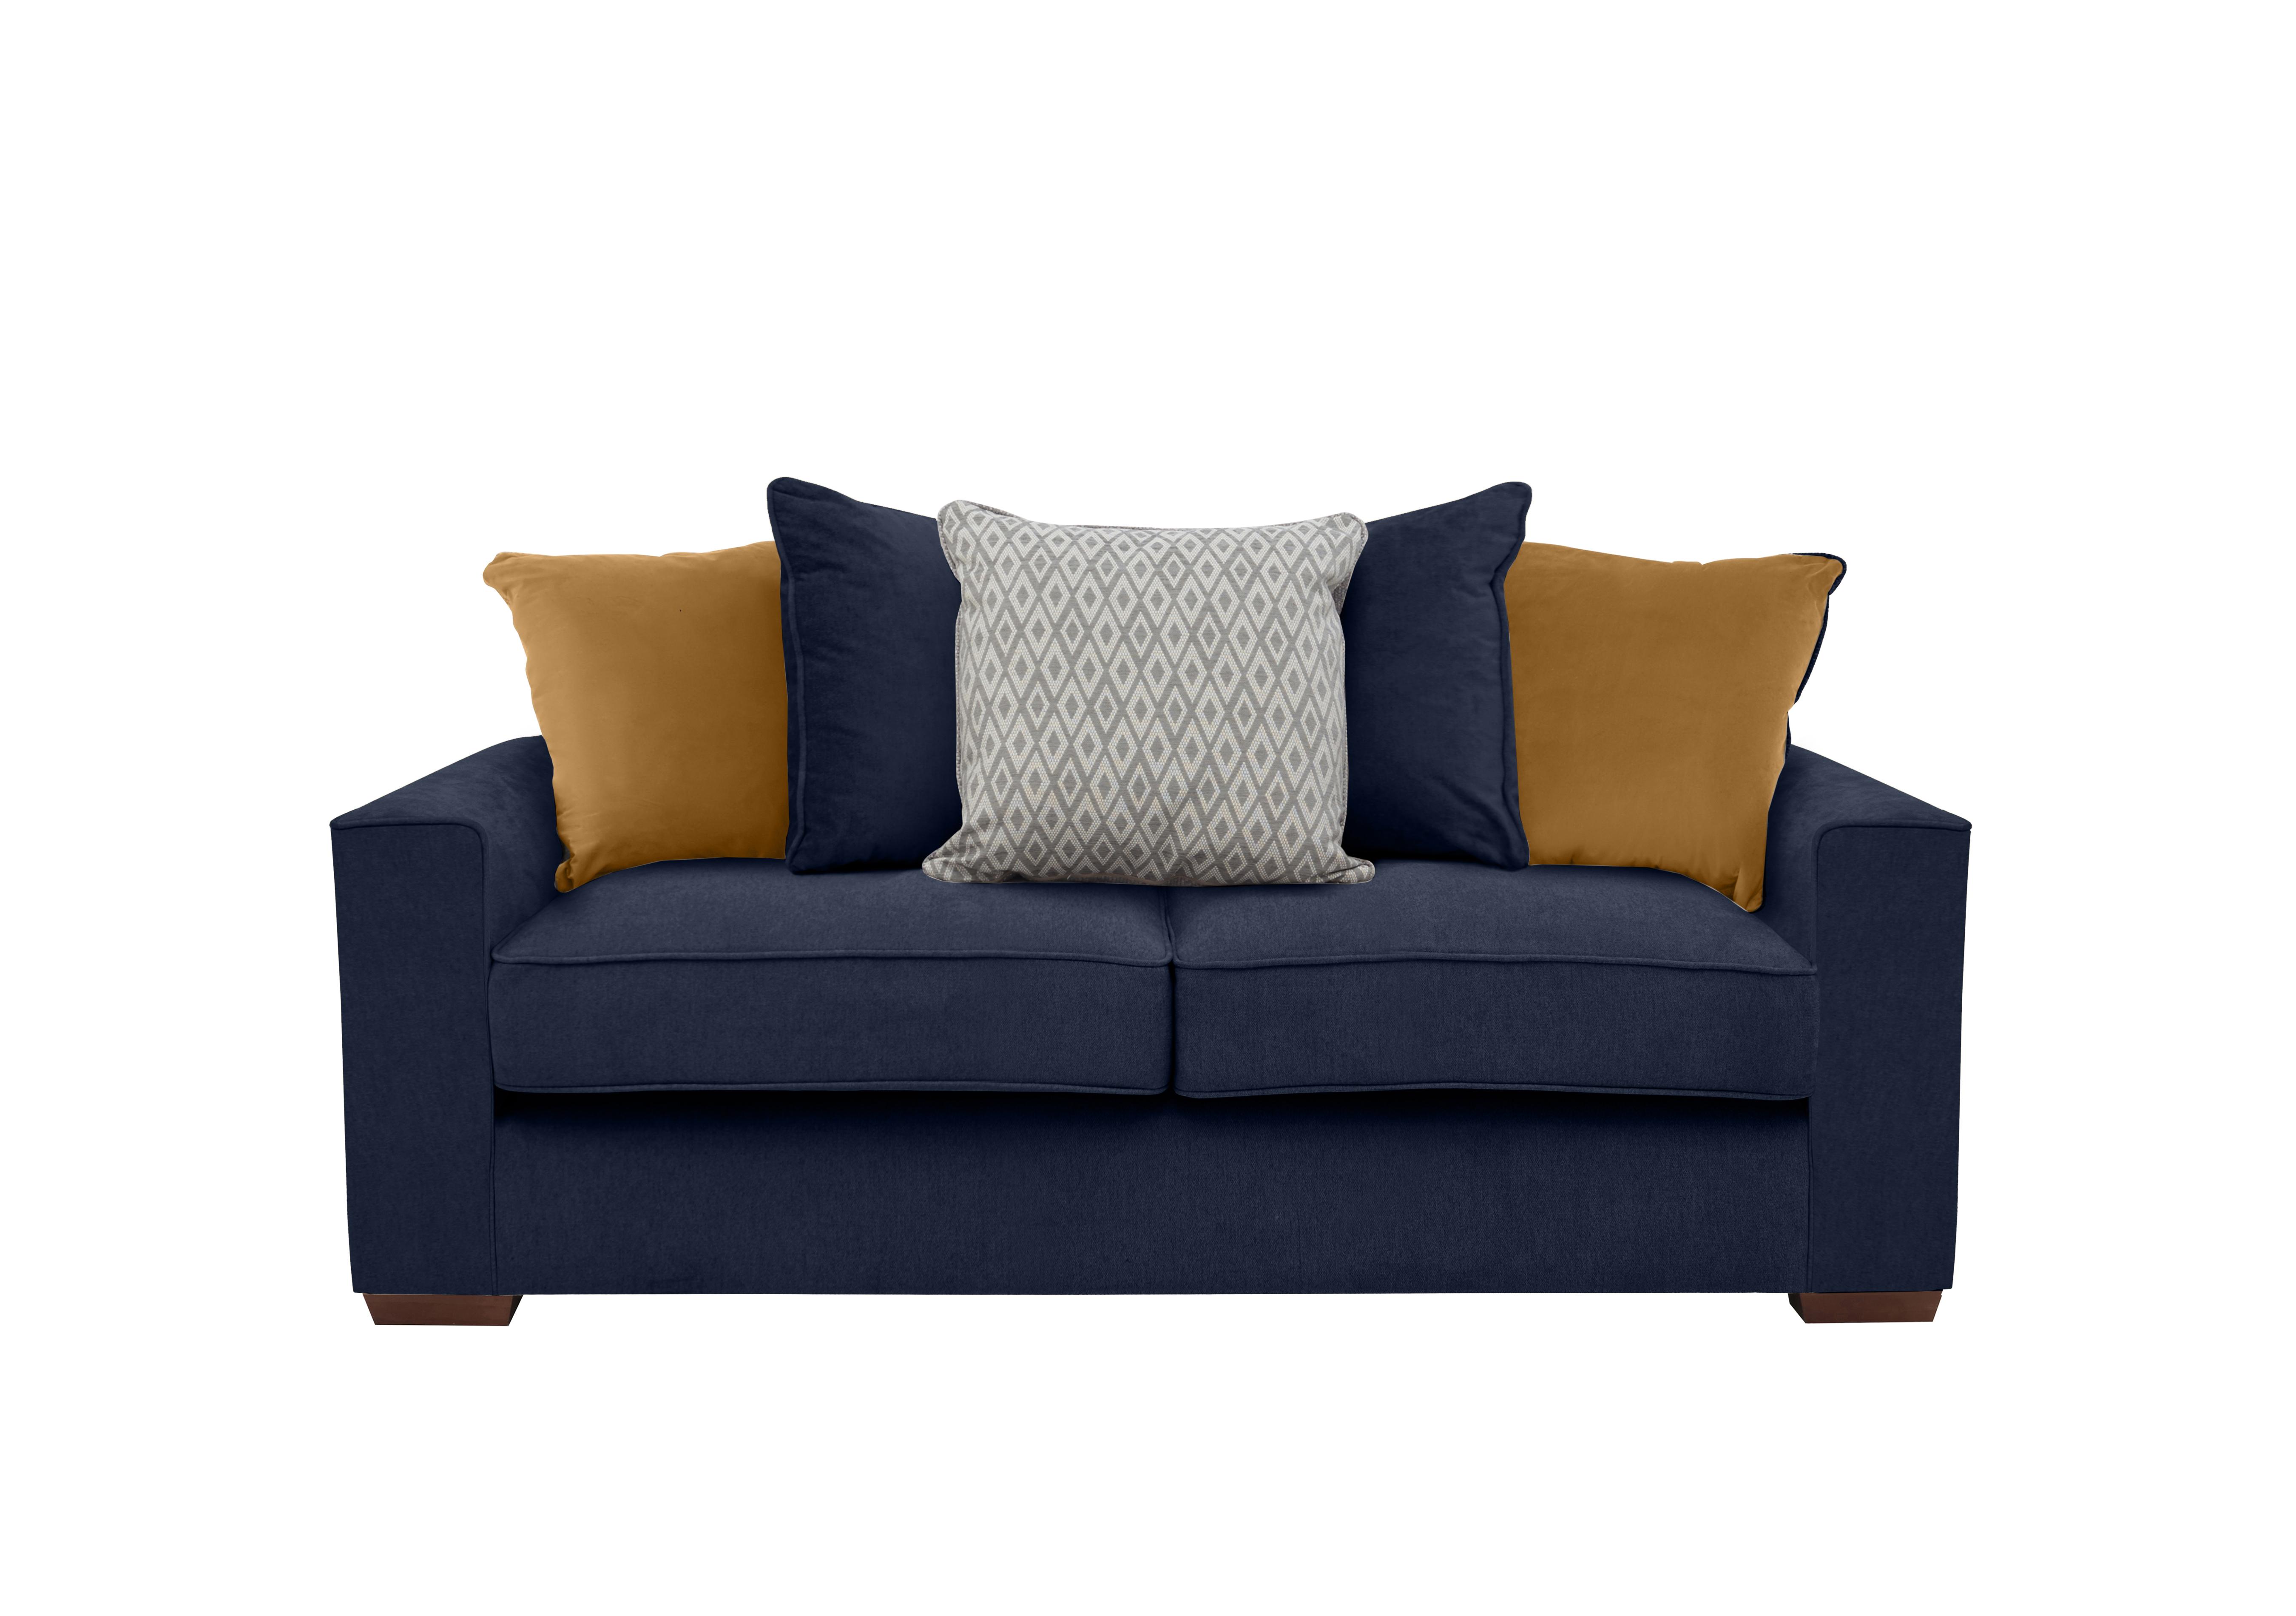 Cory 3 Seater Fabric Scatter Back Sofa Bed in Cosmo Navy Mustard Pack on Furniture Village